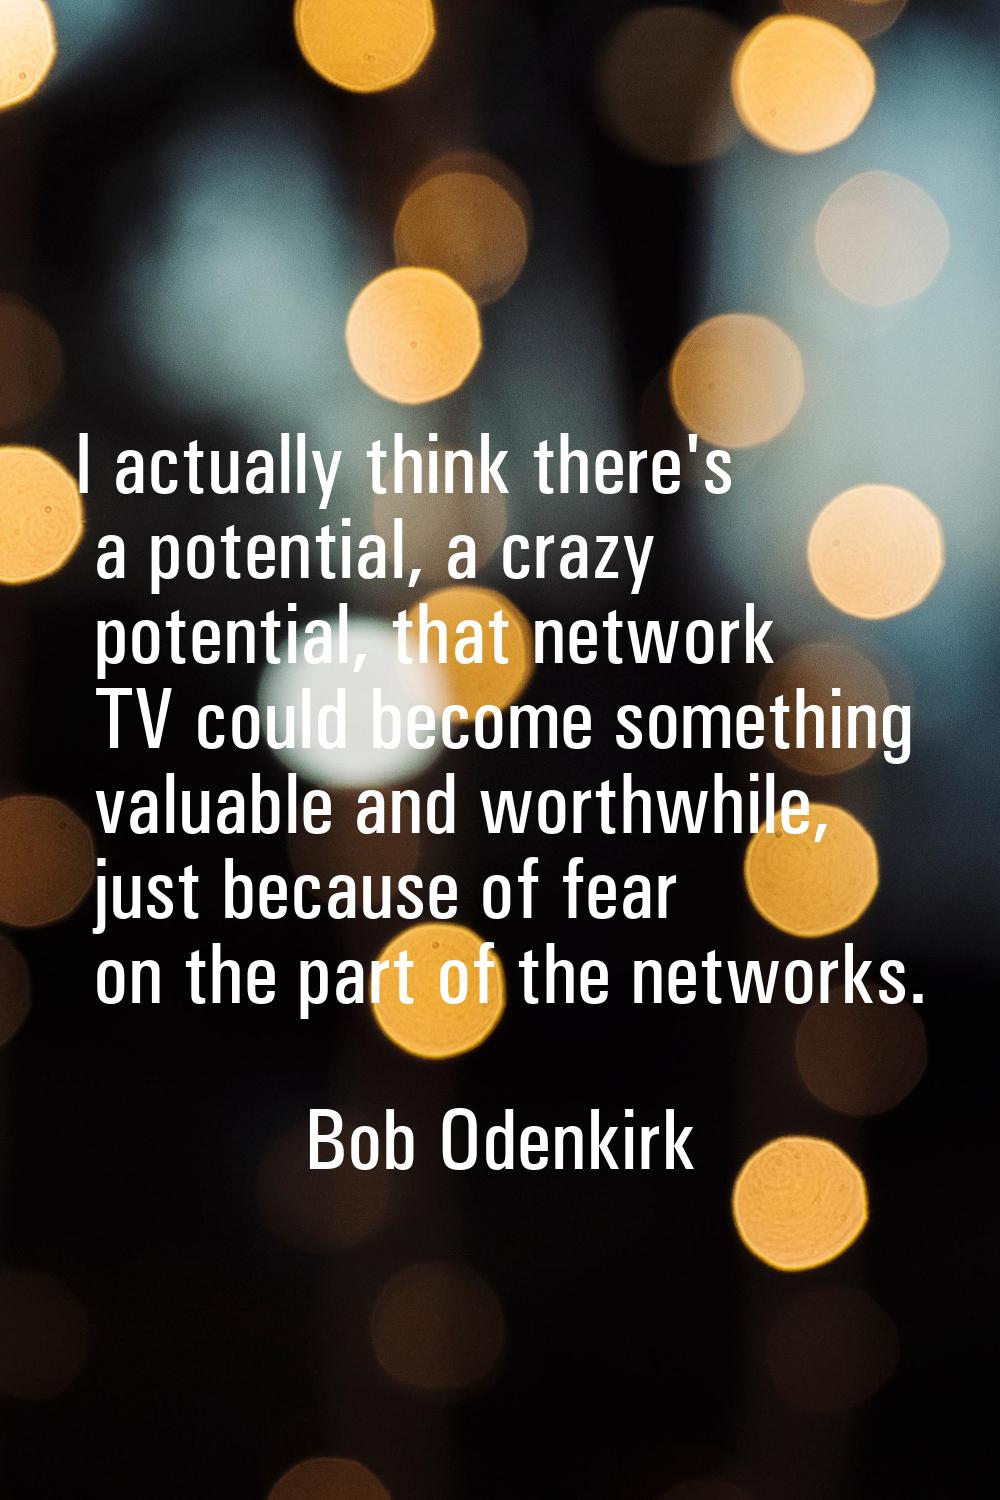 I actually think there's a potential, a crazy potential, that network TV could become something val